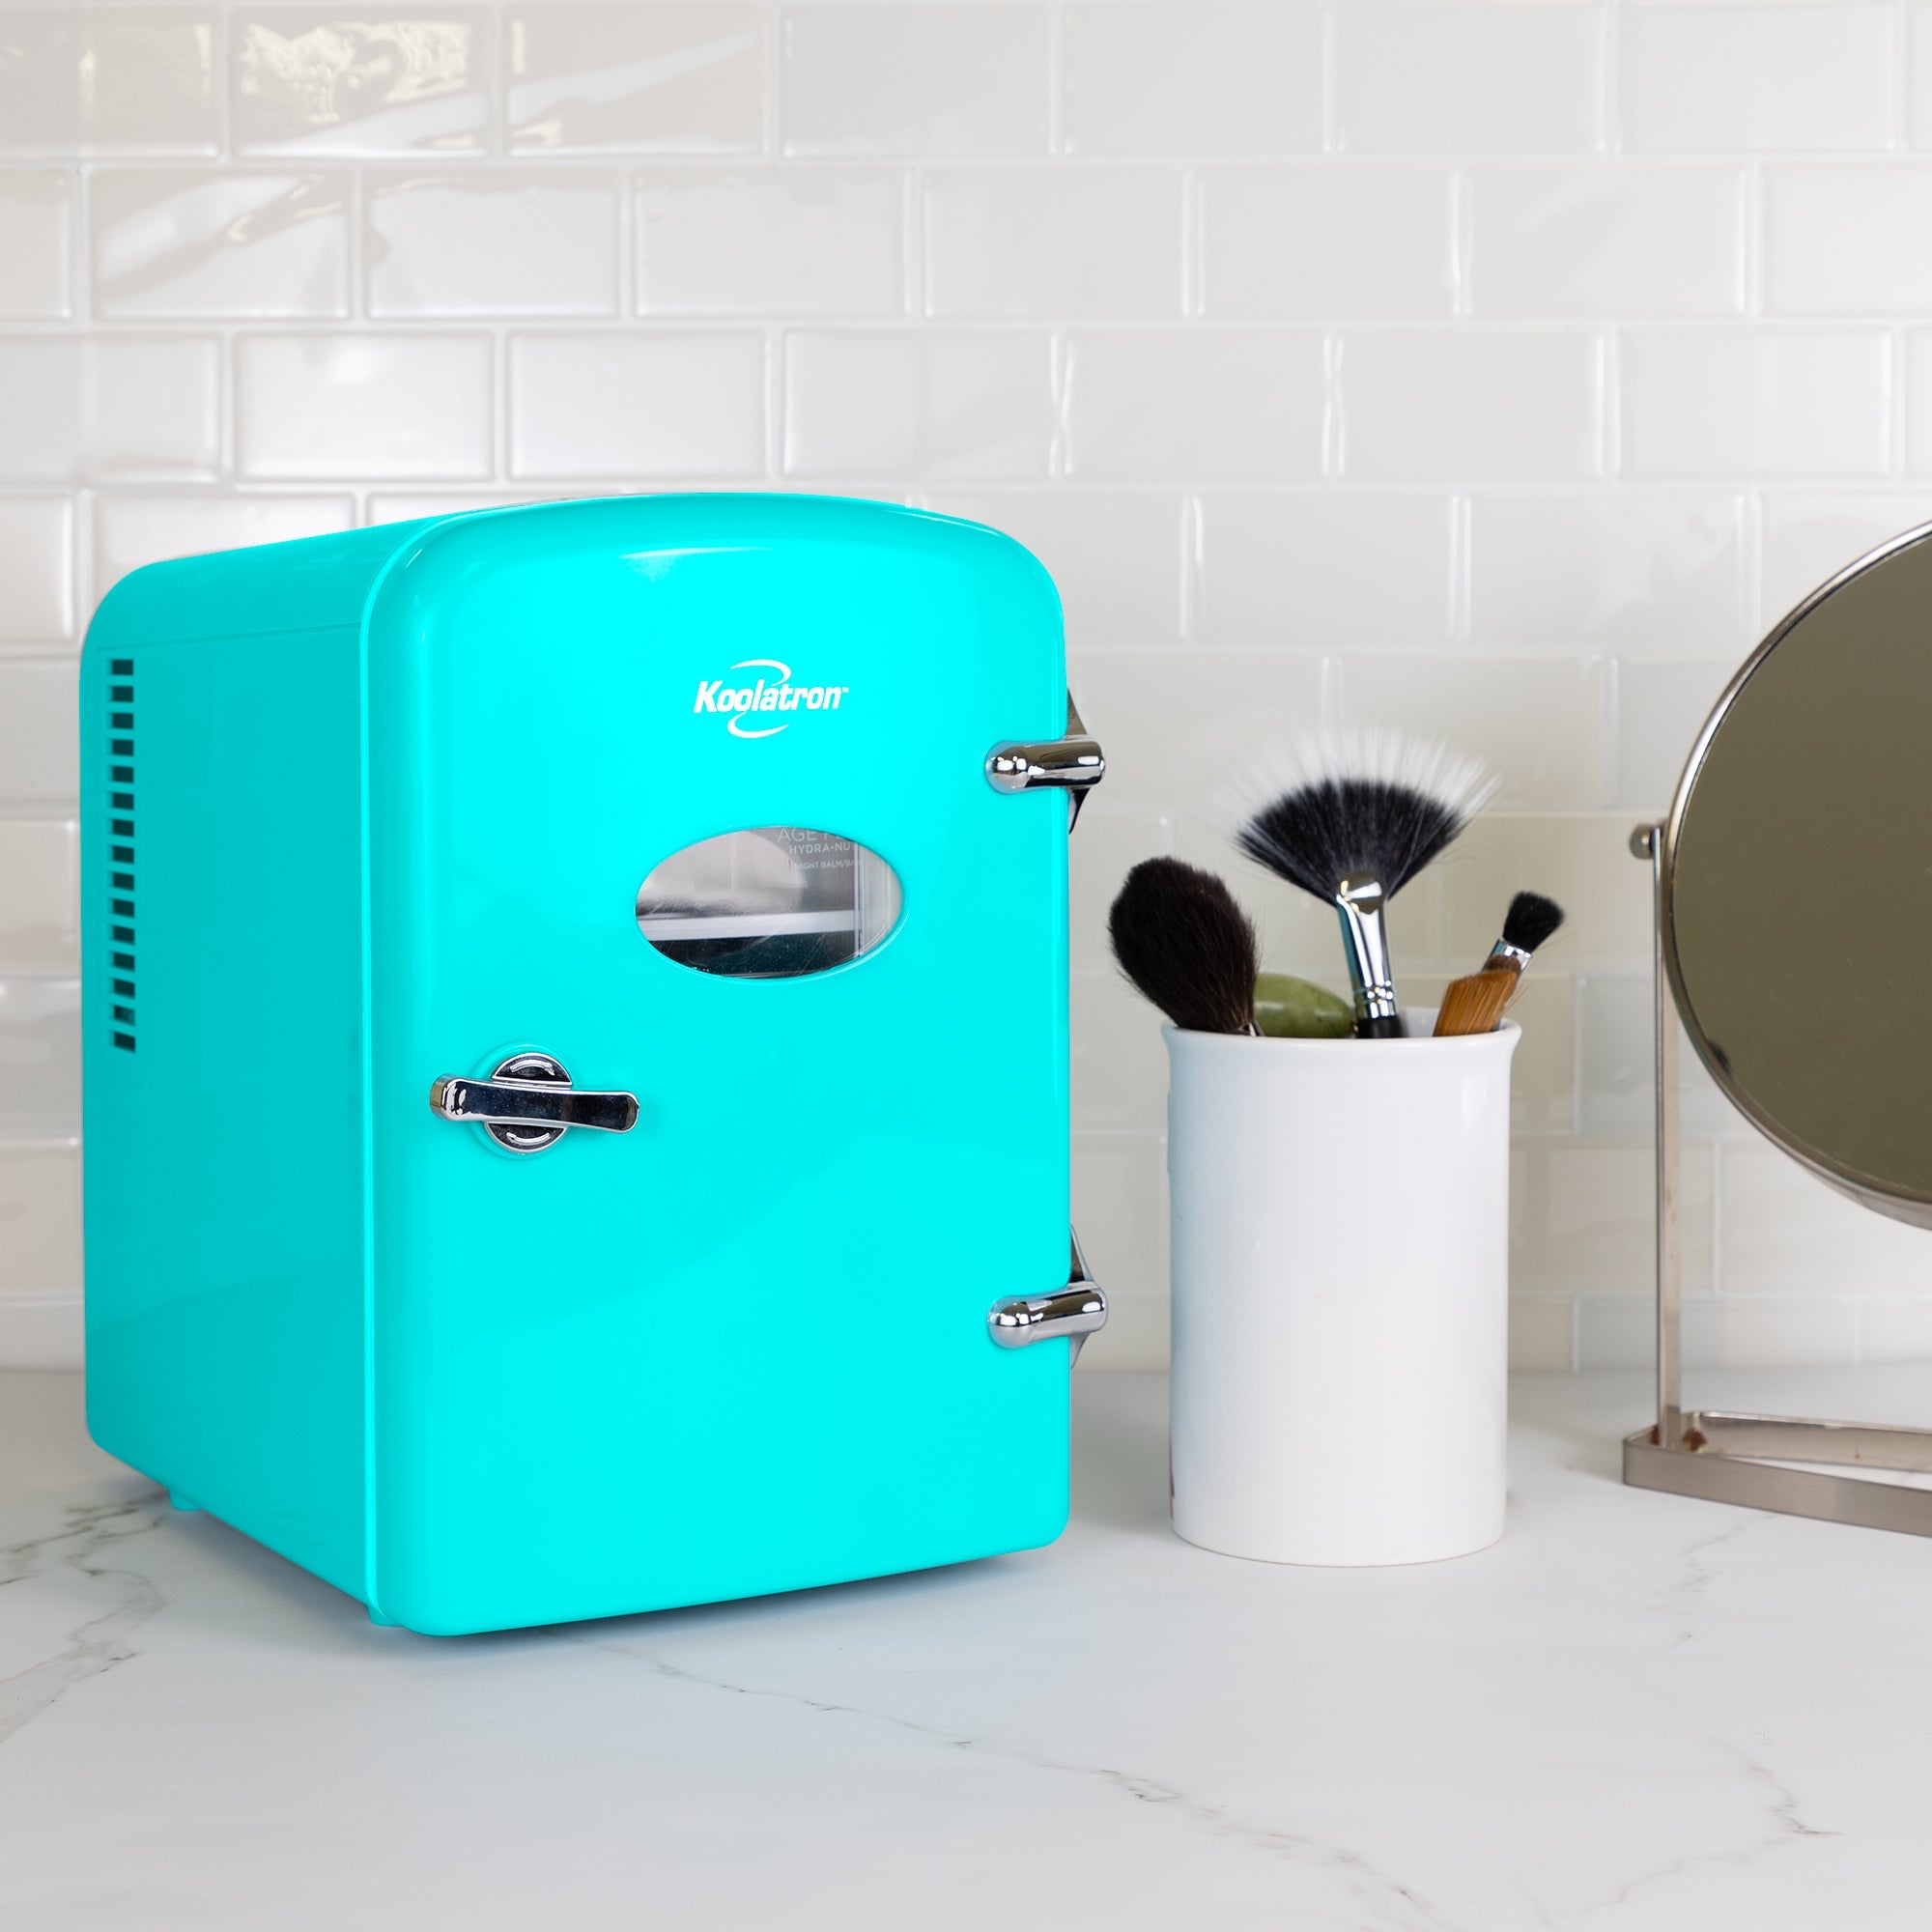 Lifestyle image of Koolatron retro 6 can mini fridge, closed, with makeup brushes in a white container on its right, on a white marbled counter with a white tile backsplash behind 